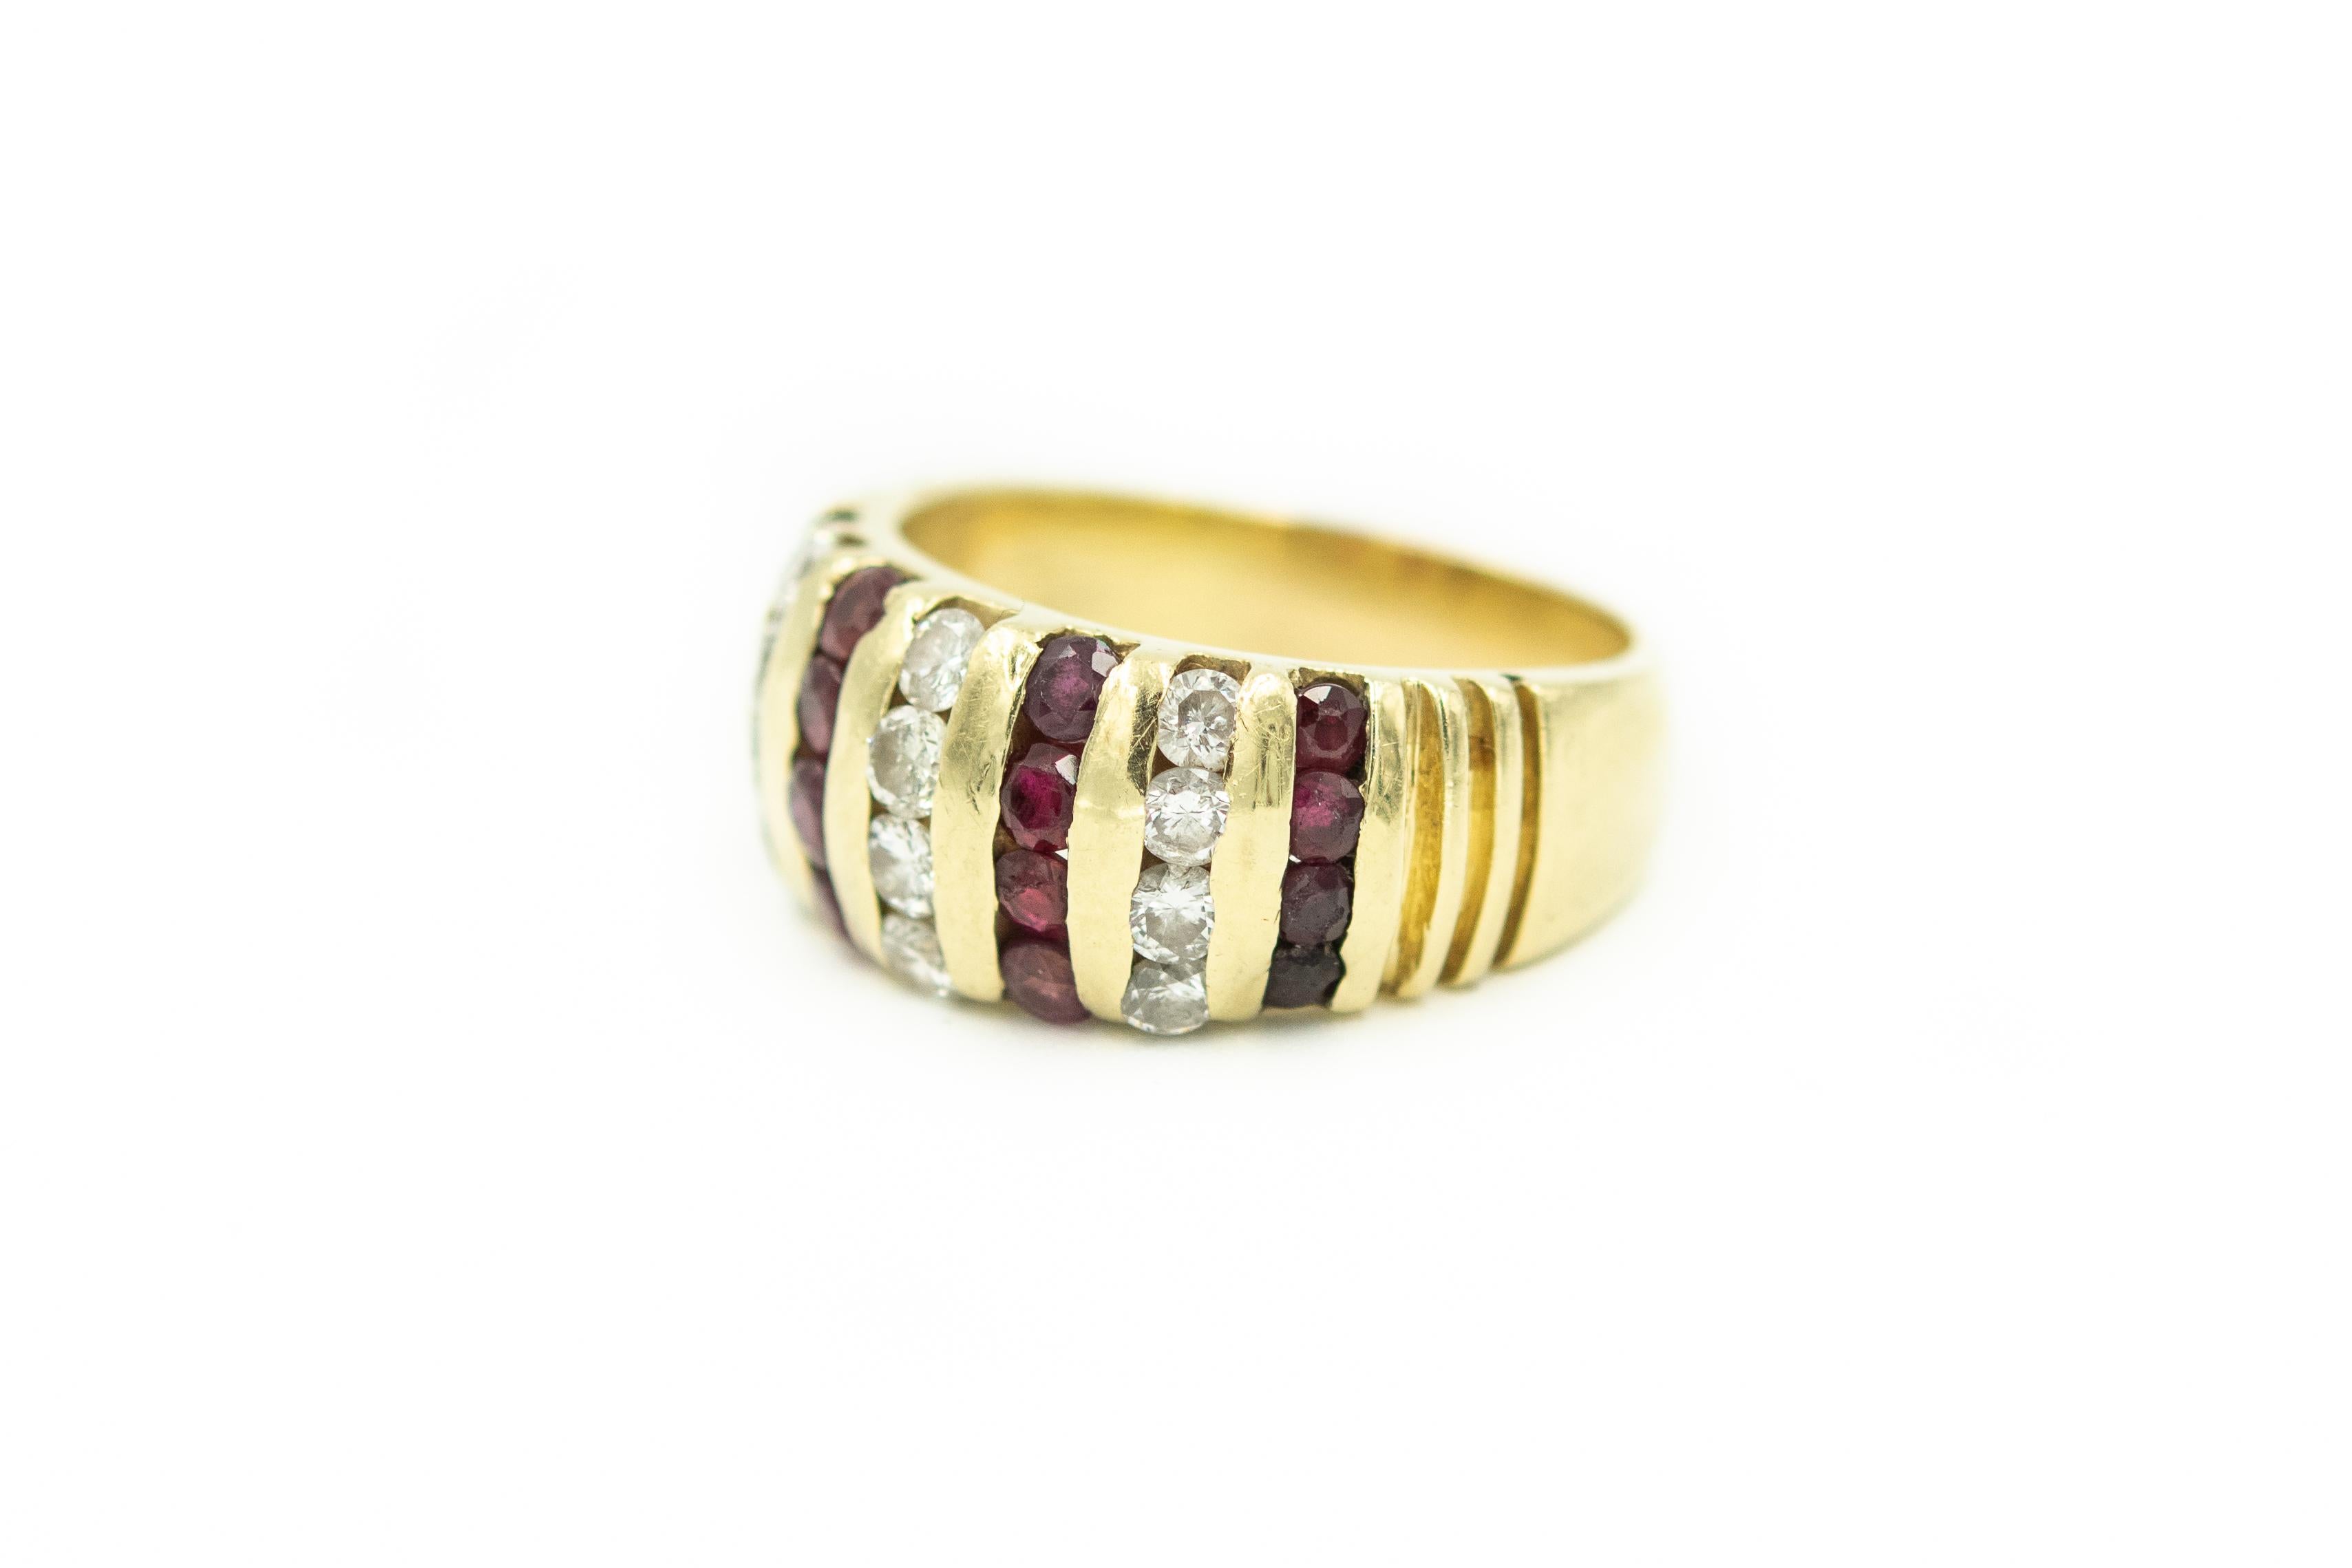 Stunning dome ring features alternating rows of channel set rubies and diamonds.  There are 4 rows that contain 4 faceted round rubies each that measure approximately 2mm each and 3 rows that contain 4  round diamonds that weight approximately. .02